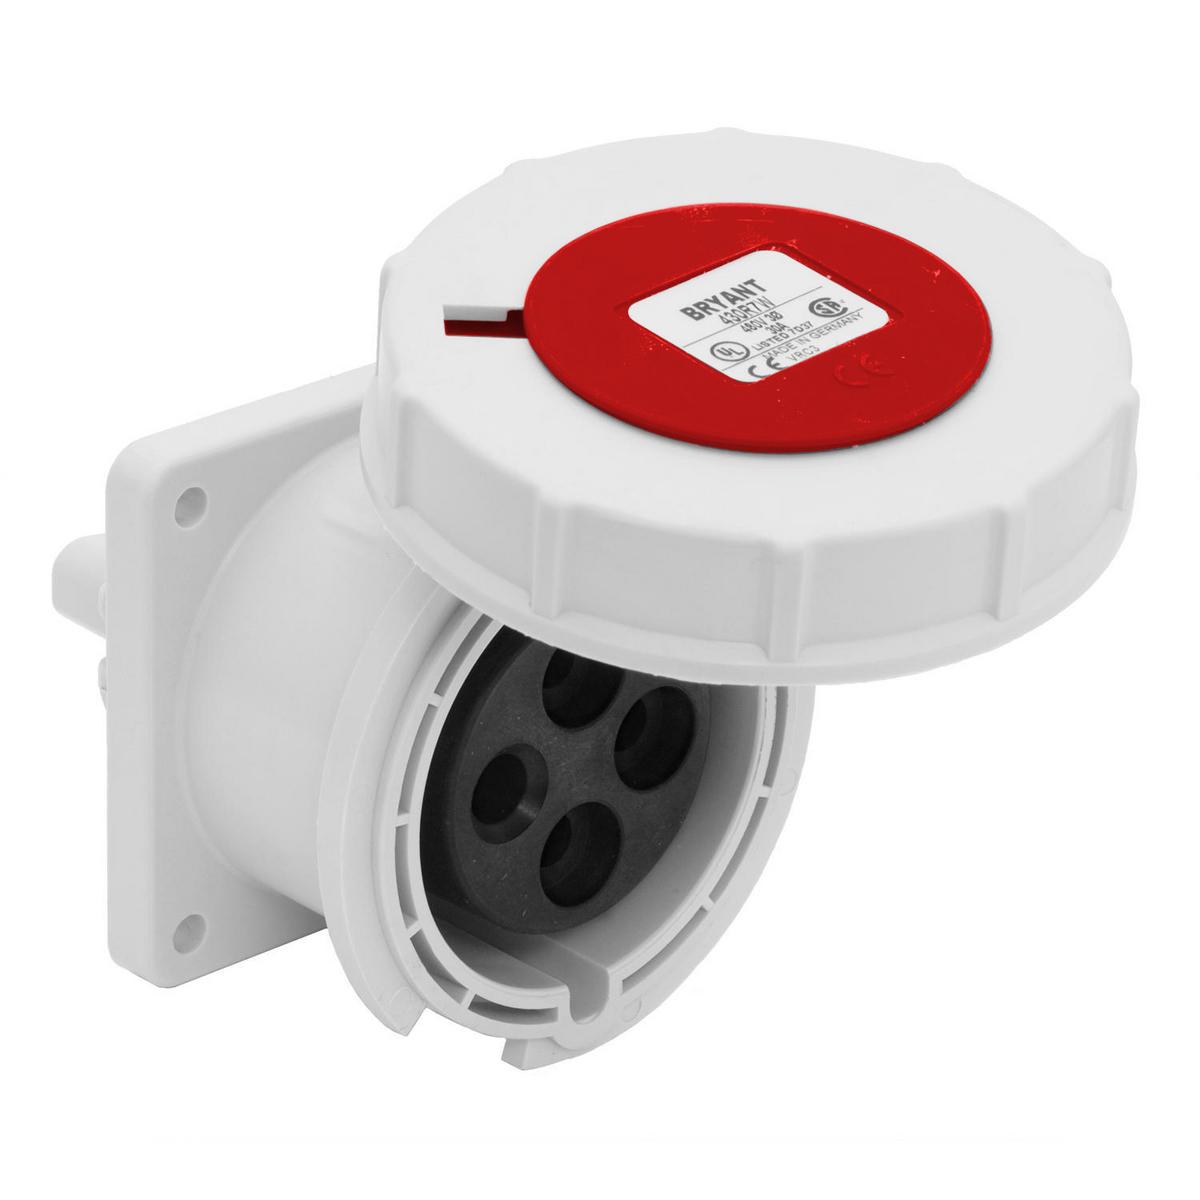 Hubbell 530R7W Heavy Duty Products, IEC Pin and Sleeve Devices, Industrial Grade, Female Receptacle, 30A 3-Phase Wye 277/480V AC, 4-Pole 5-Wire Grounding, Screw Terminals, Red, Watertight  ; Watertight